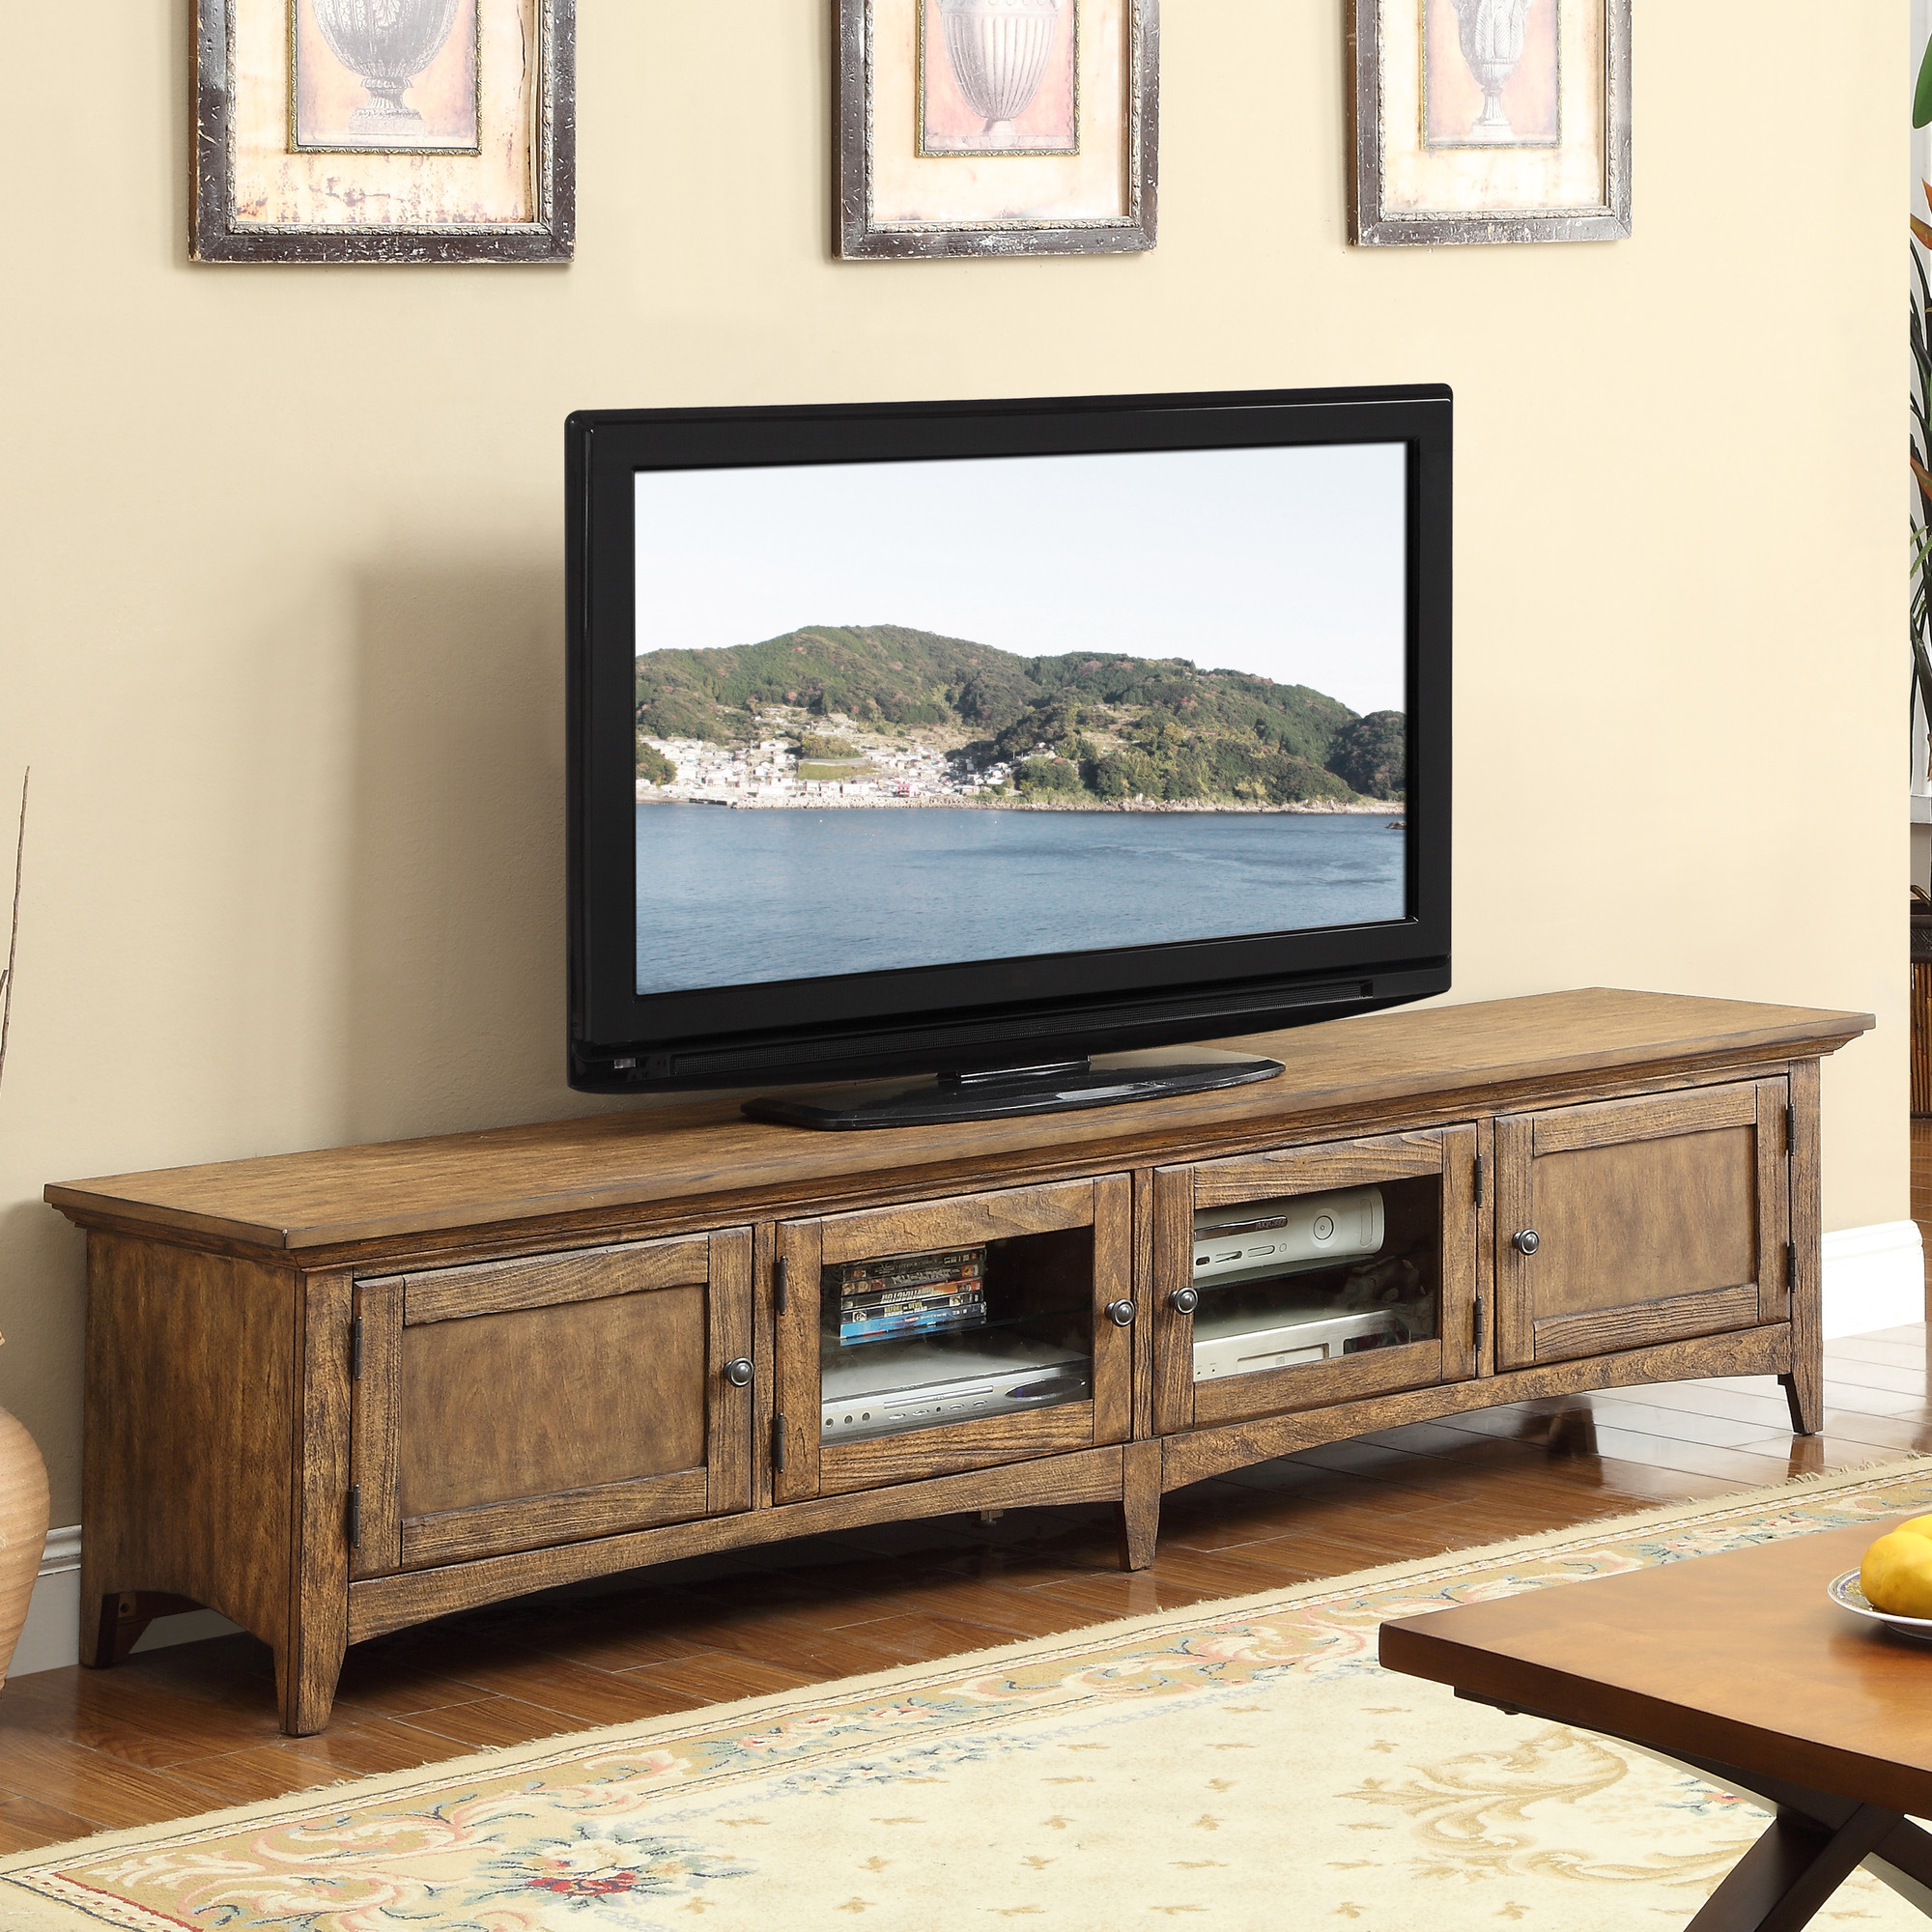 20 Cool TV Stand Designs For Your Home 14 